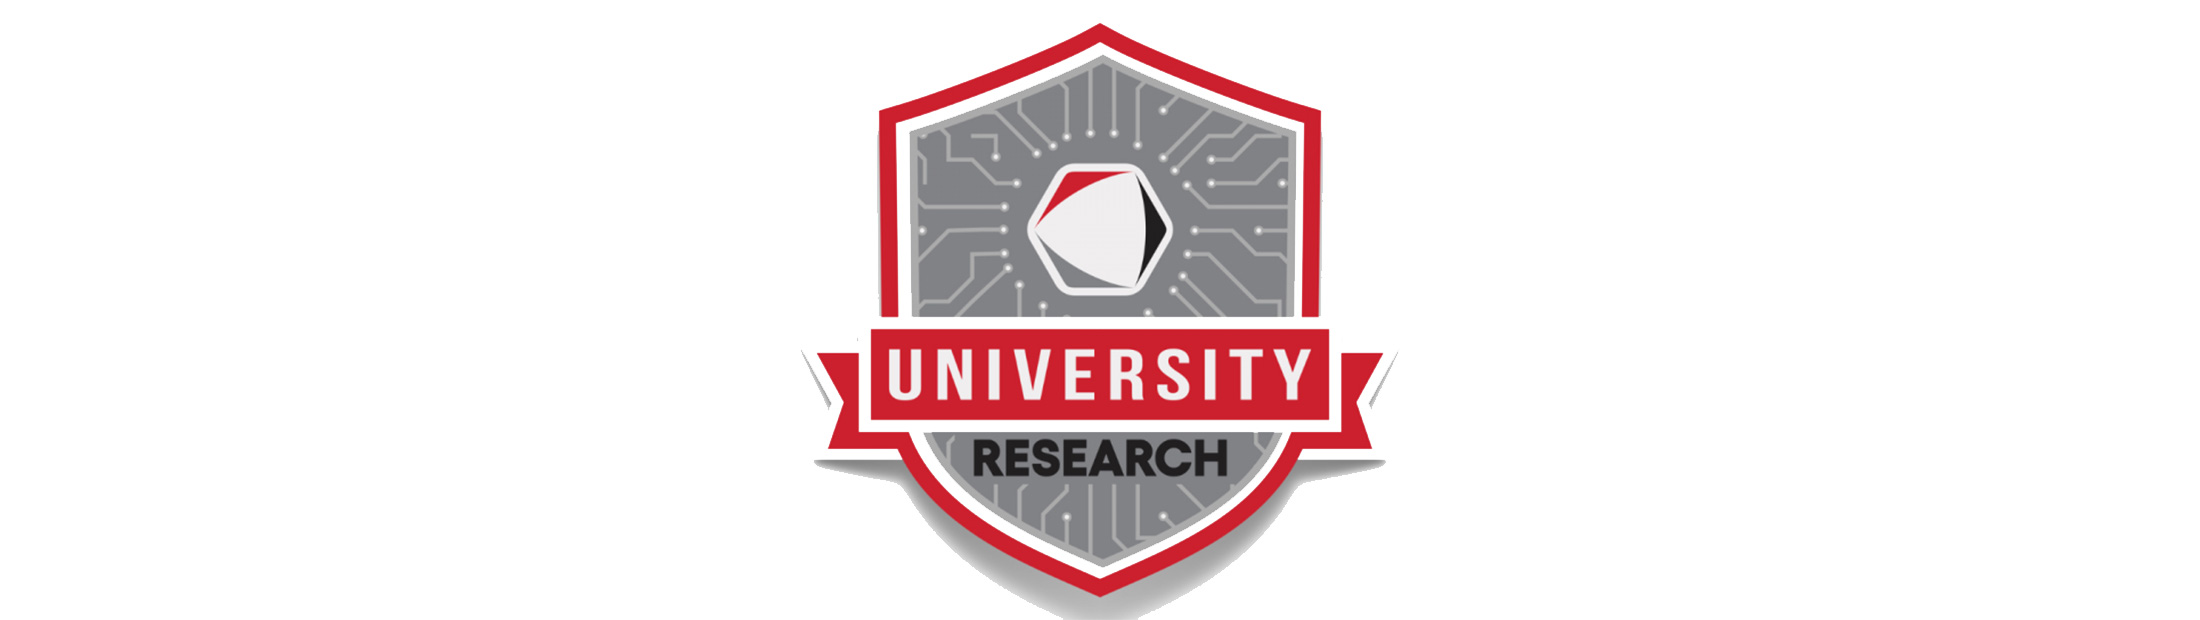 Graphic logo of University Research with a gray shield and red outlines.